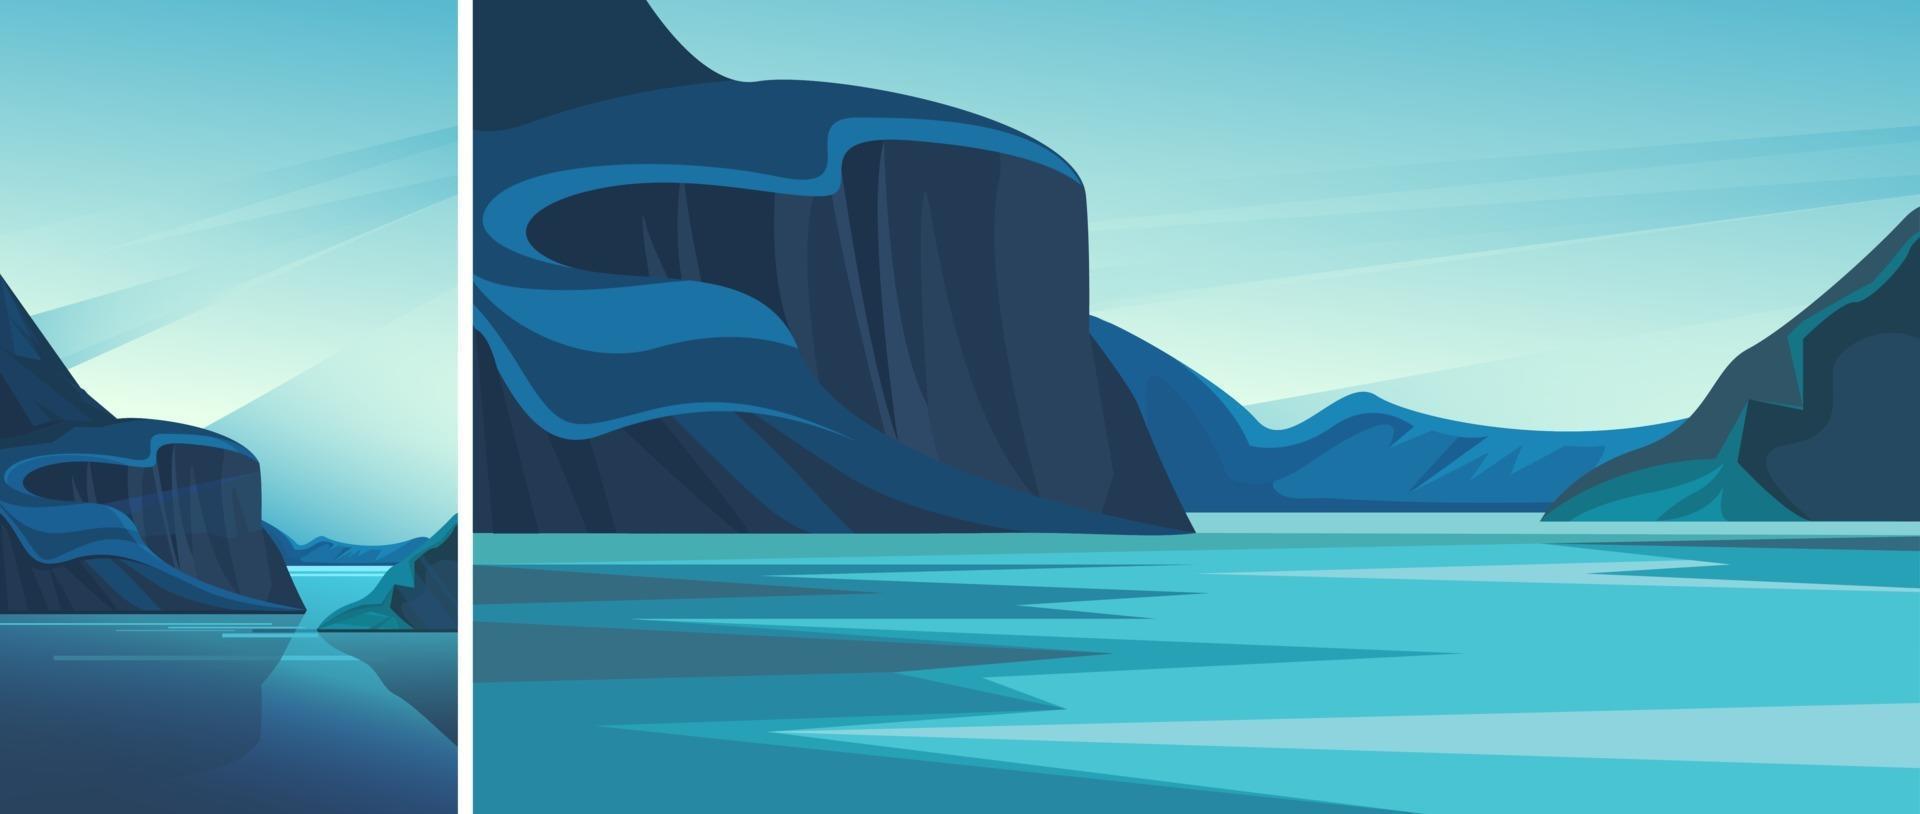 Fjord with blue water vector